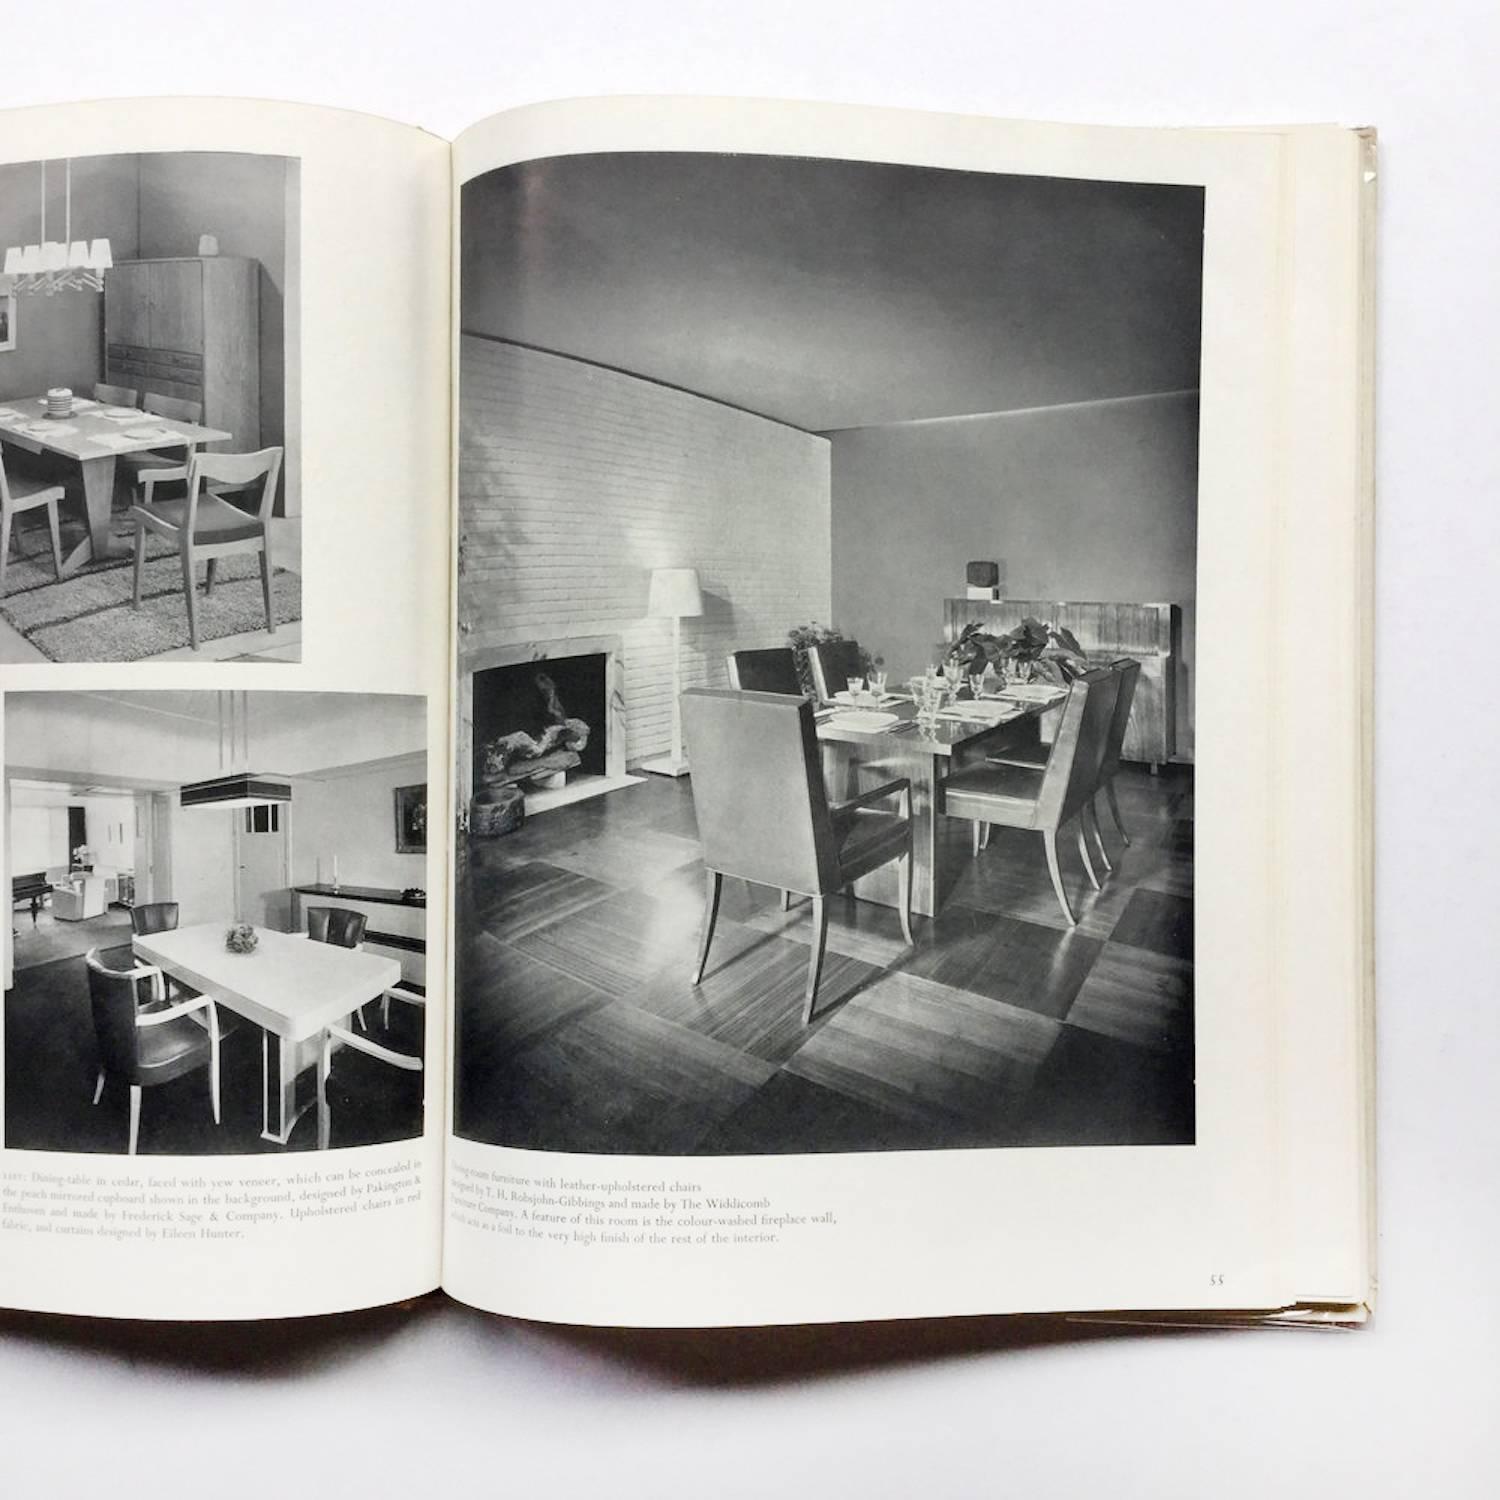 Published by The Studio, London.

By Rathbone Holme and Kathleen M. Frost.

A selection of leading architectural projects, interior designs, furniture and household items presented by The Studio in this traditionally annual publication. The